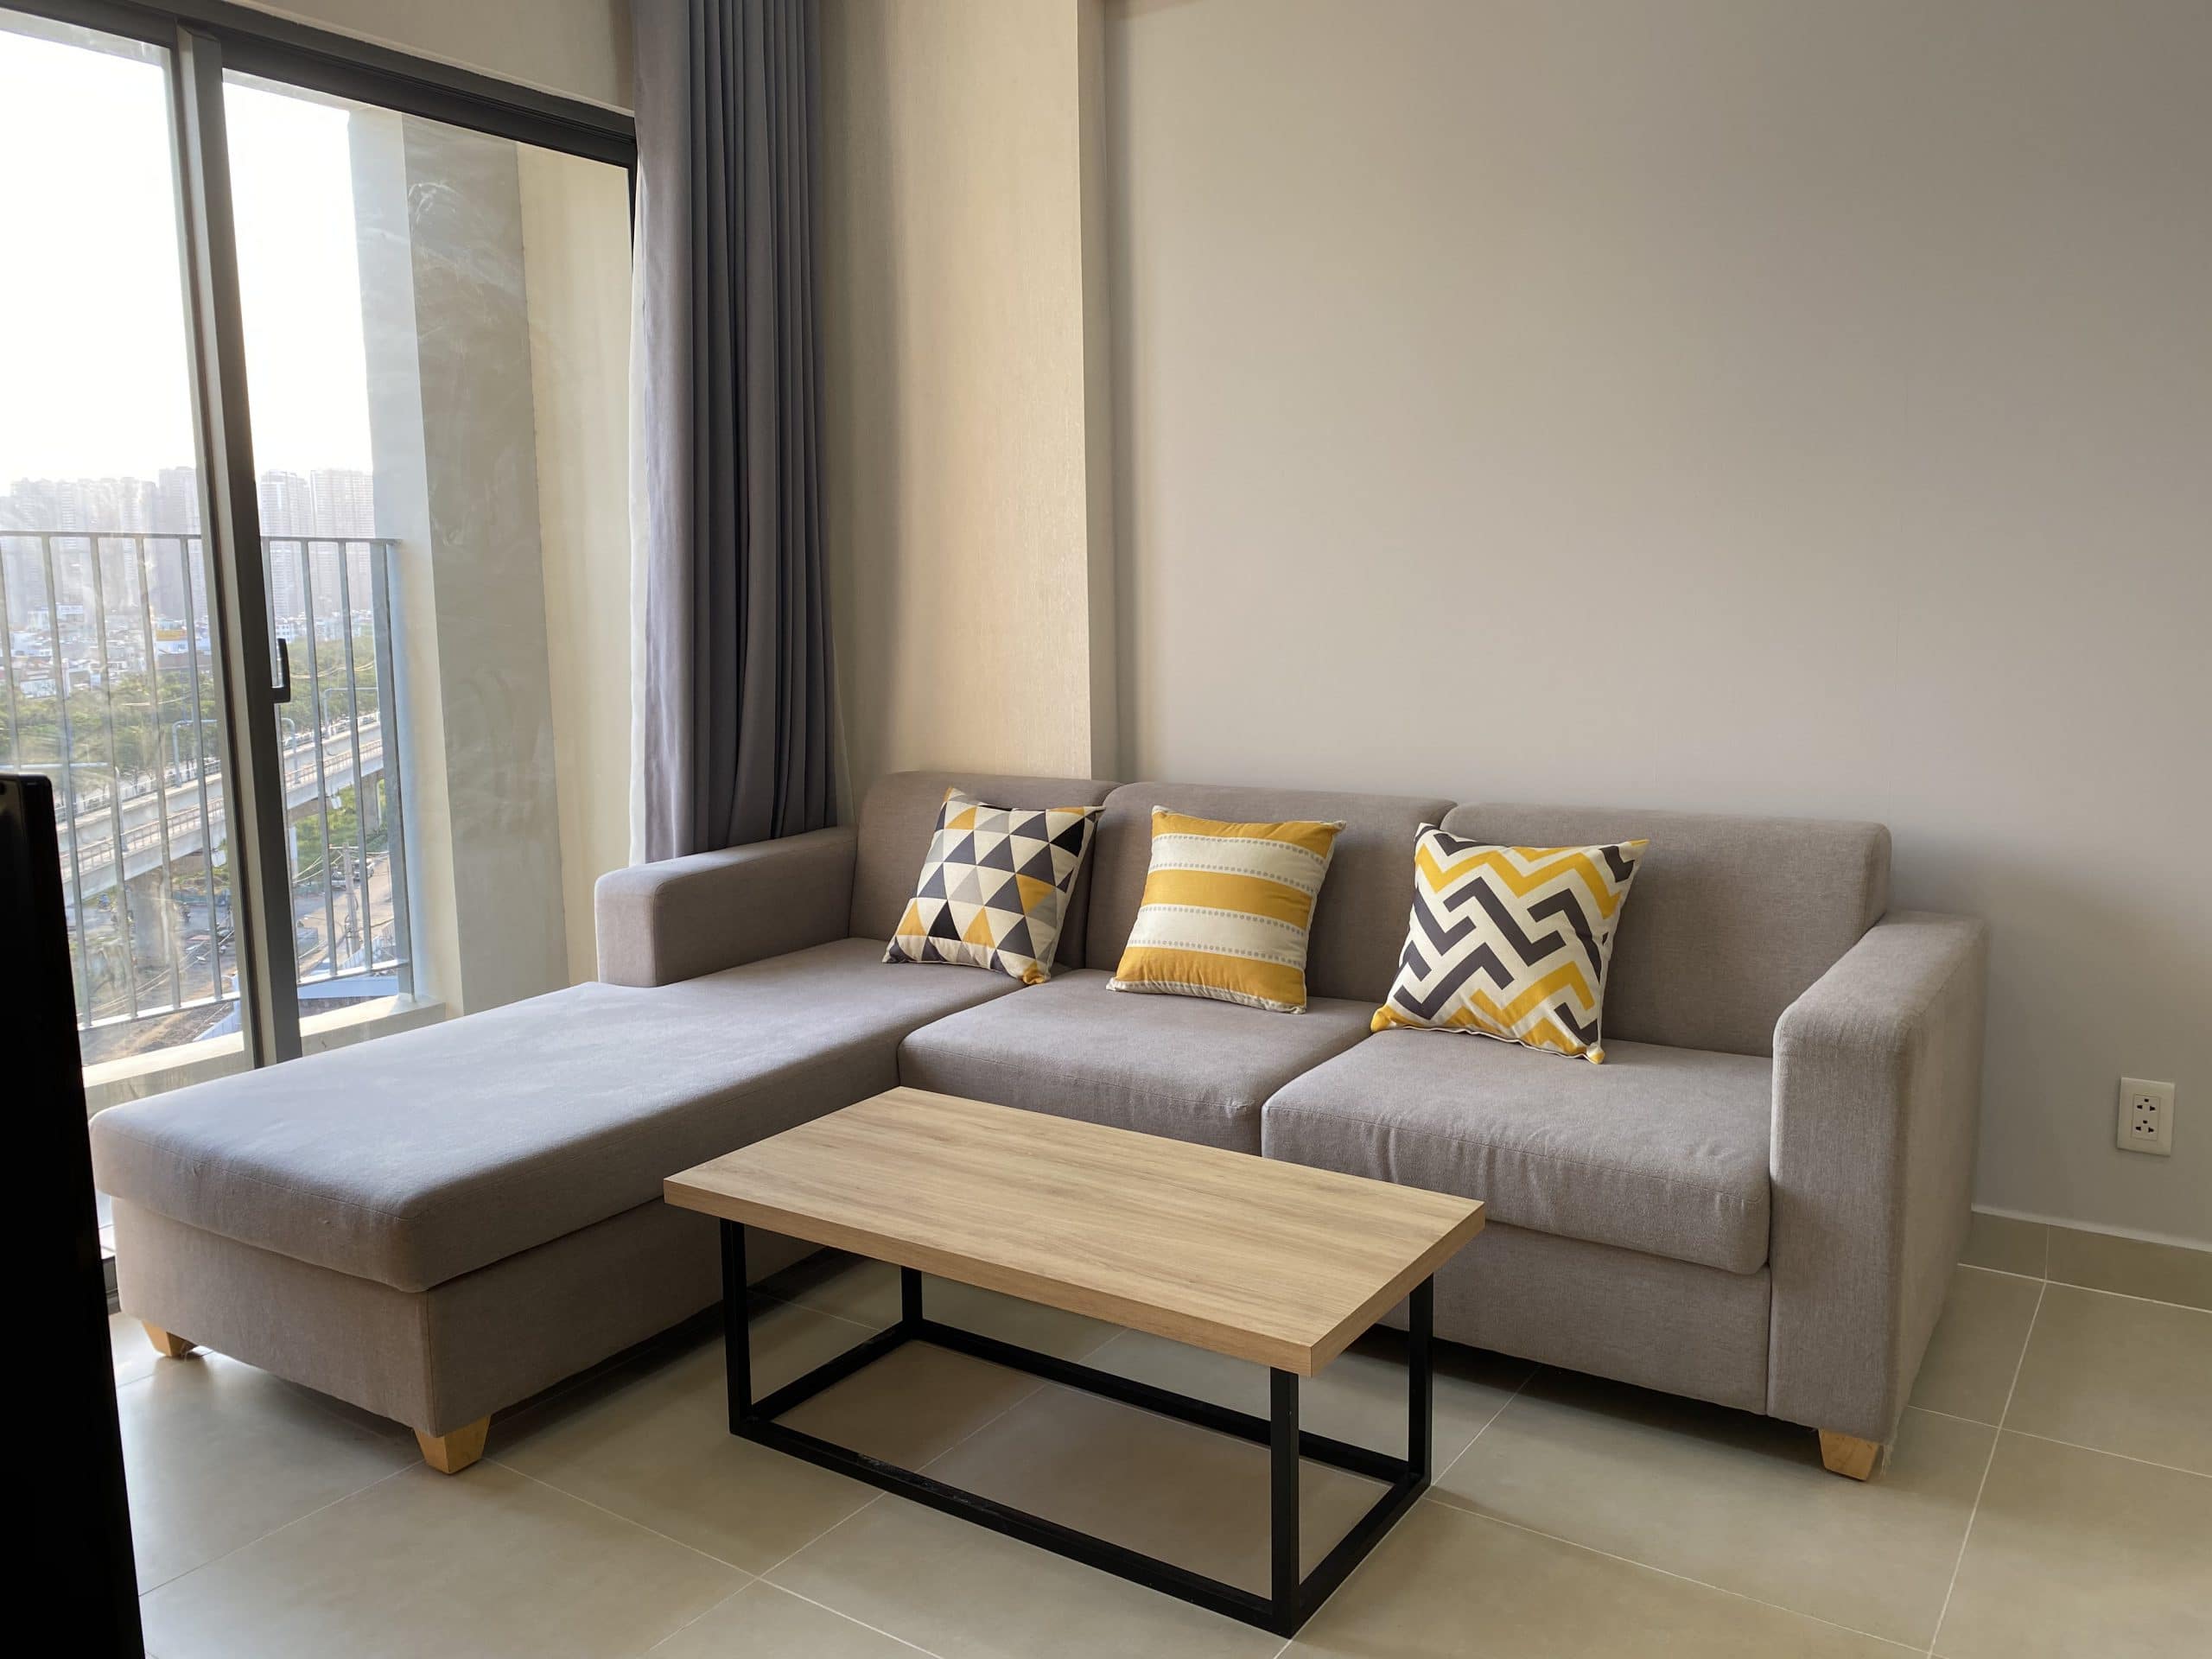 URBAN STYLE APARTMENT IN MASTERI THAO DIEN – MODERN AND CONVENIENT